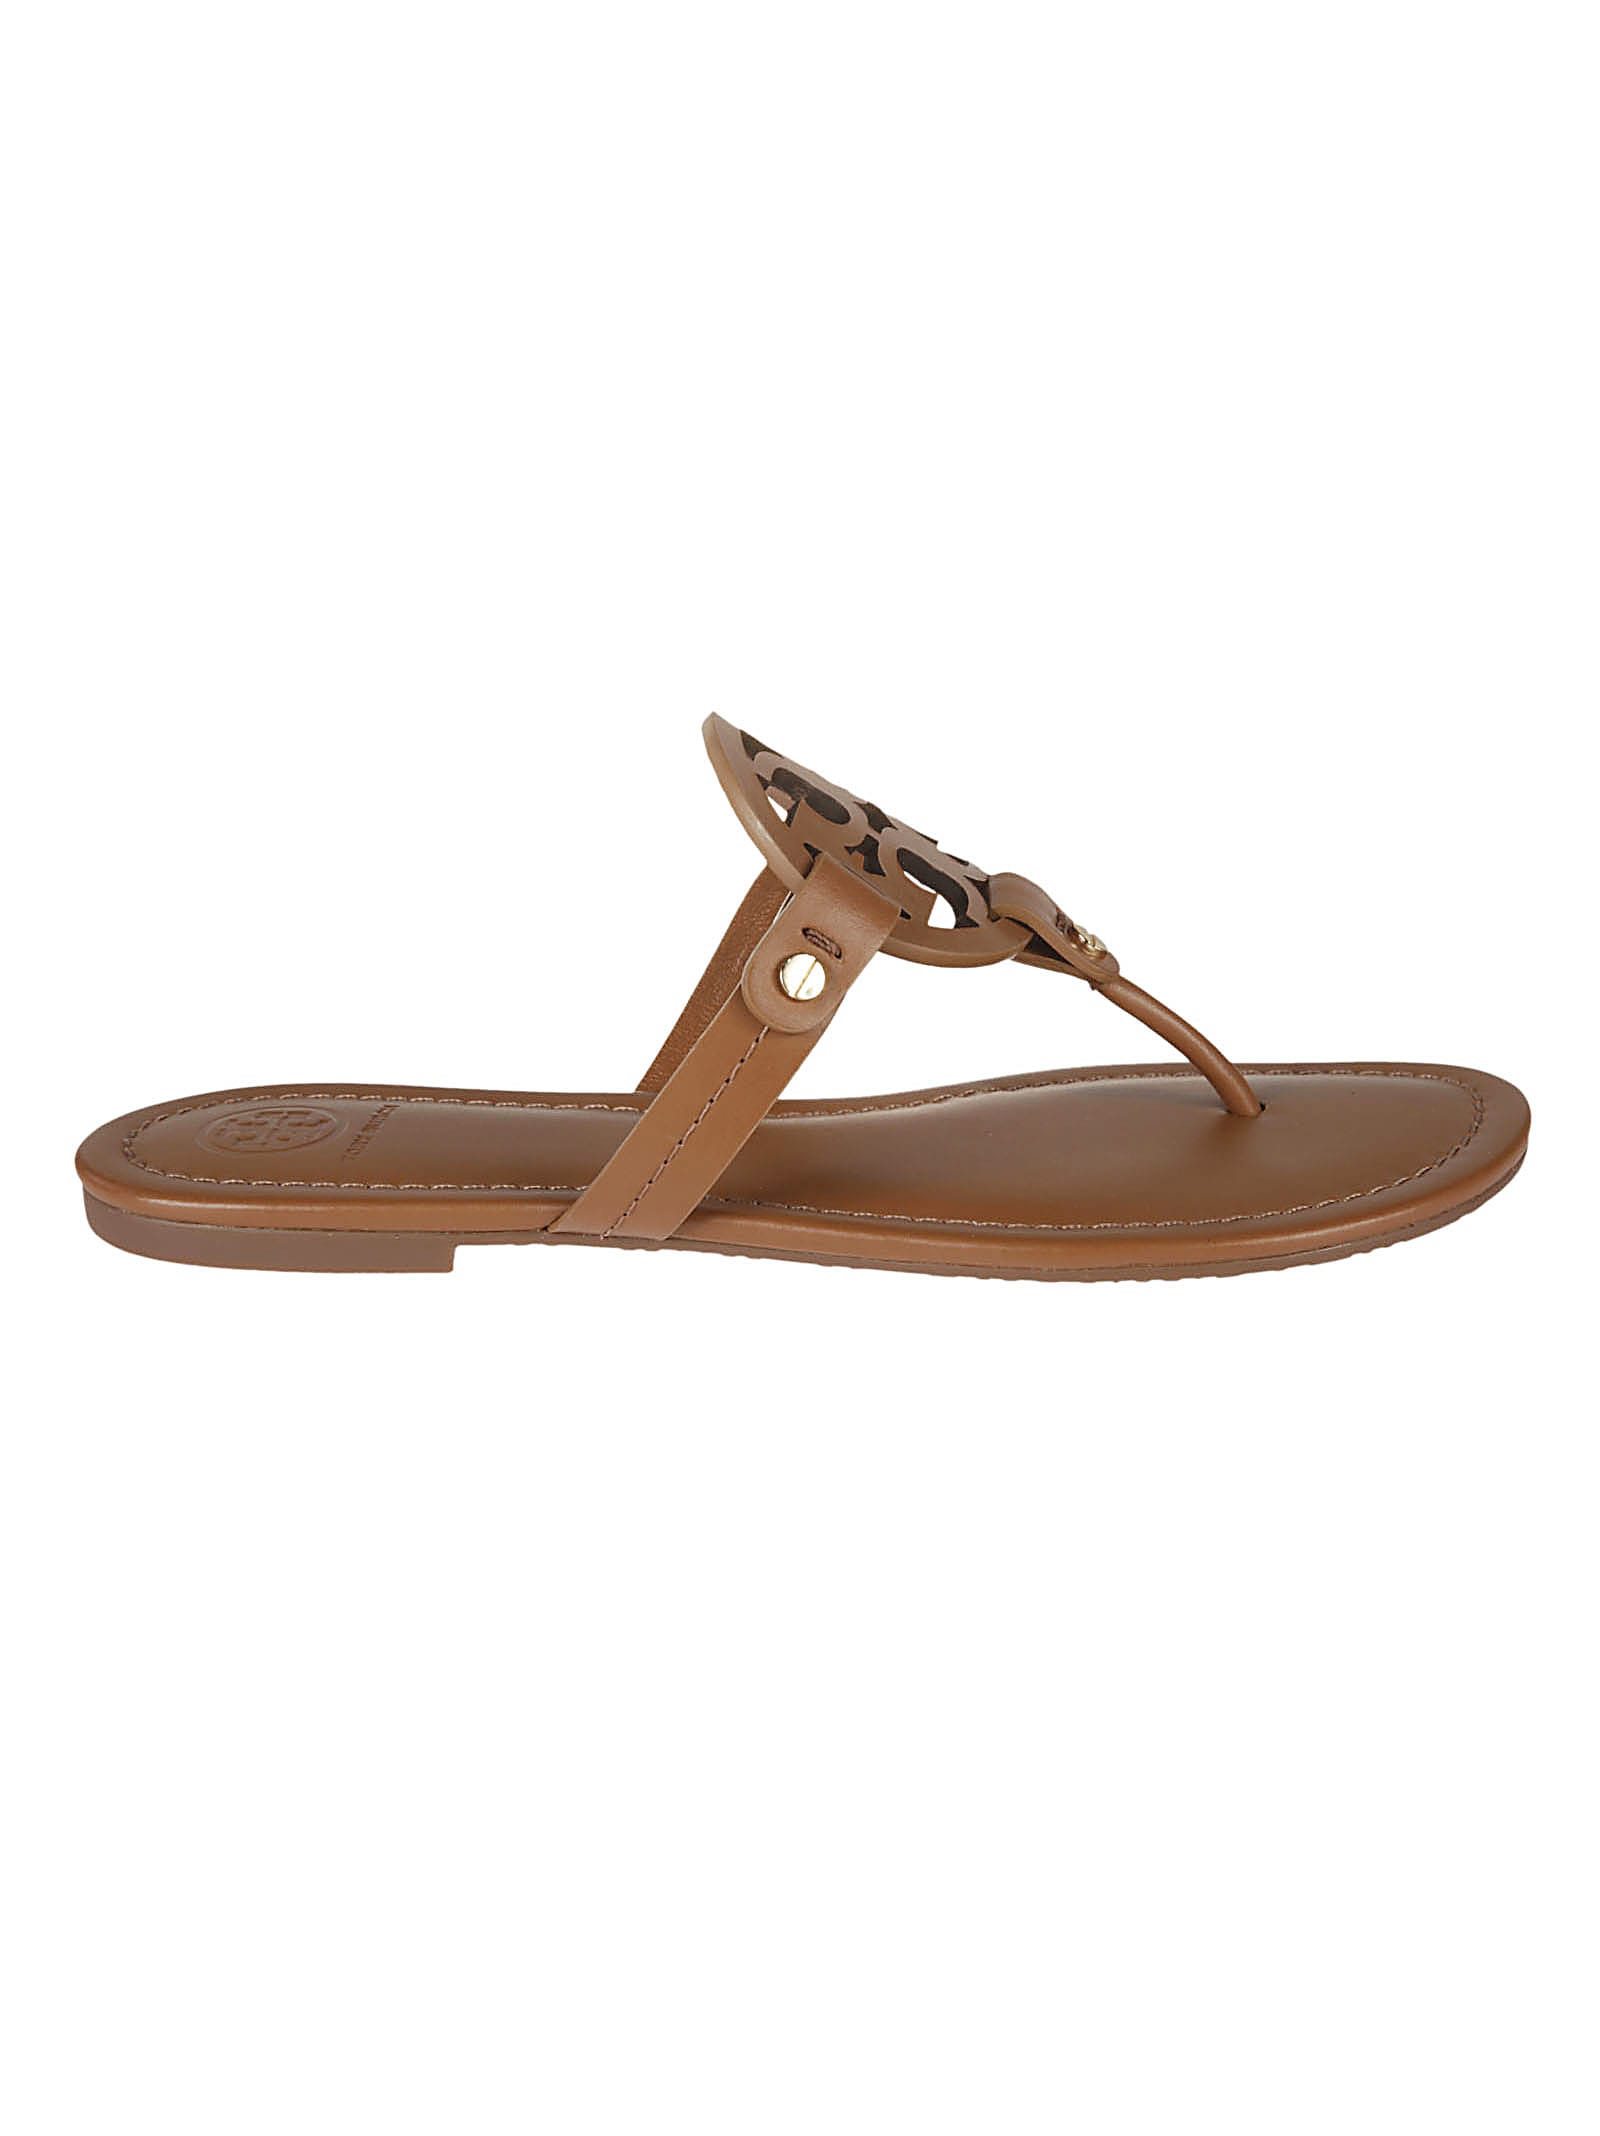 Buy Tory Burch Miller Flat Sandals online, shop Tory Burch shoes with free shipping